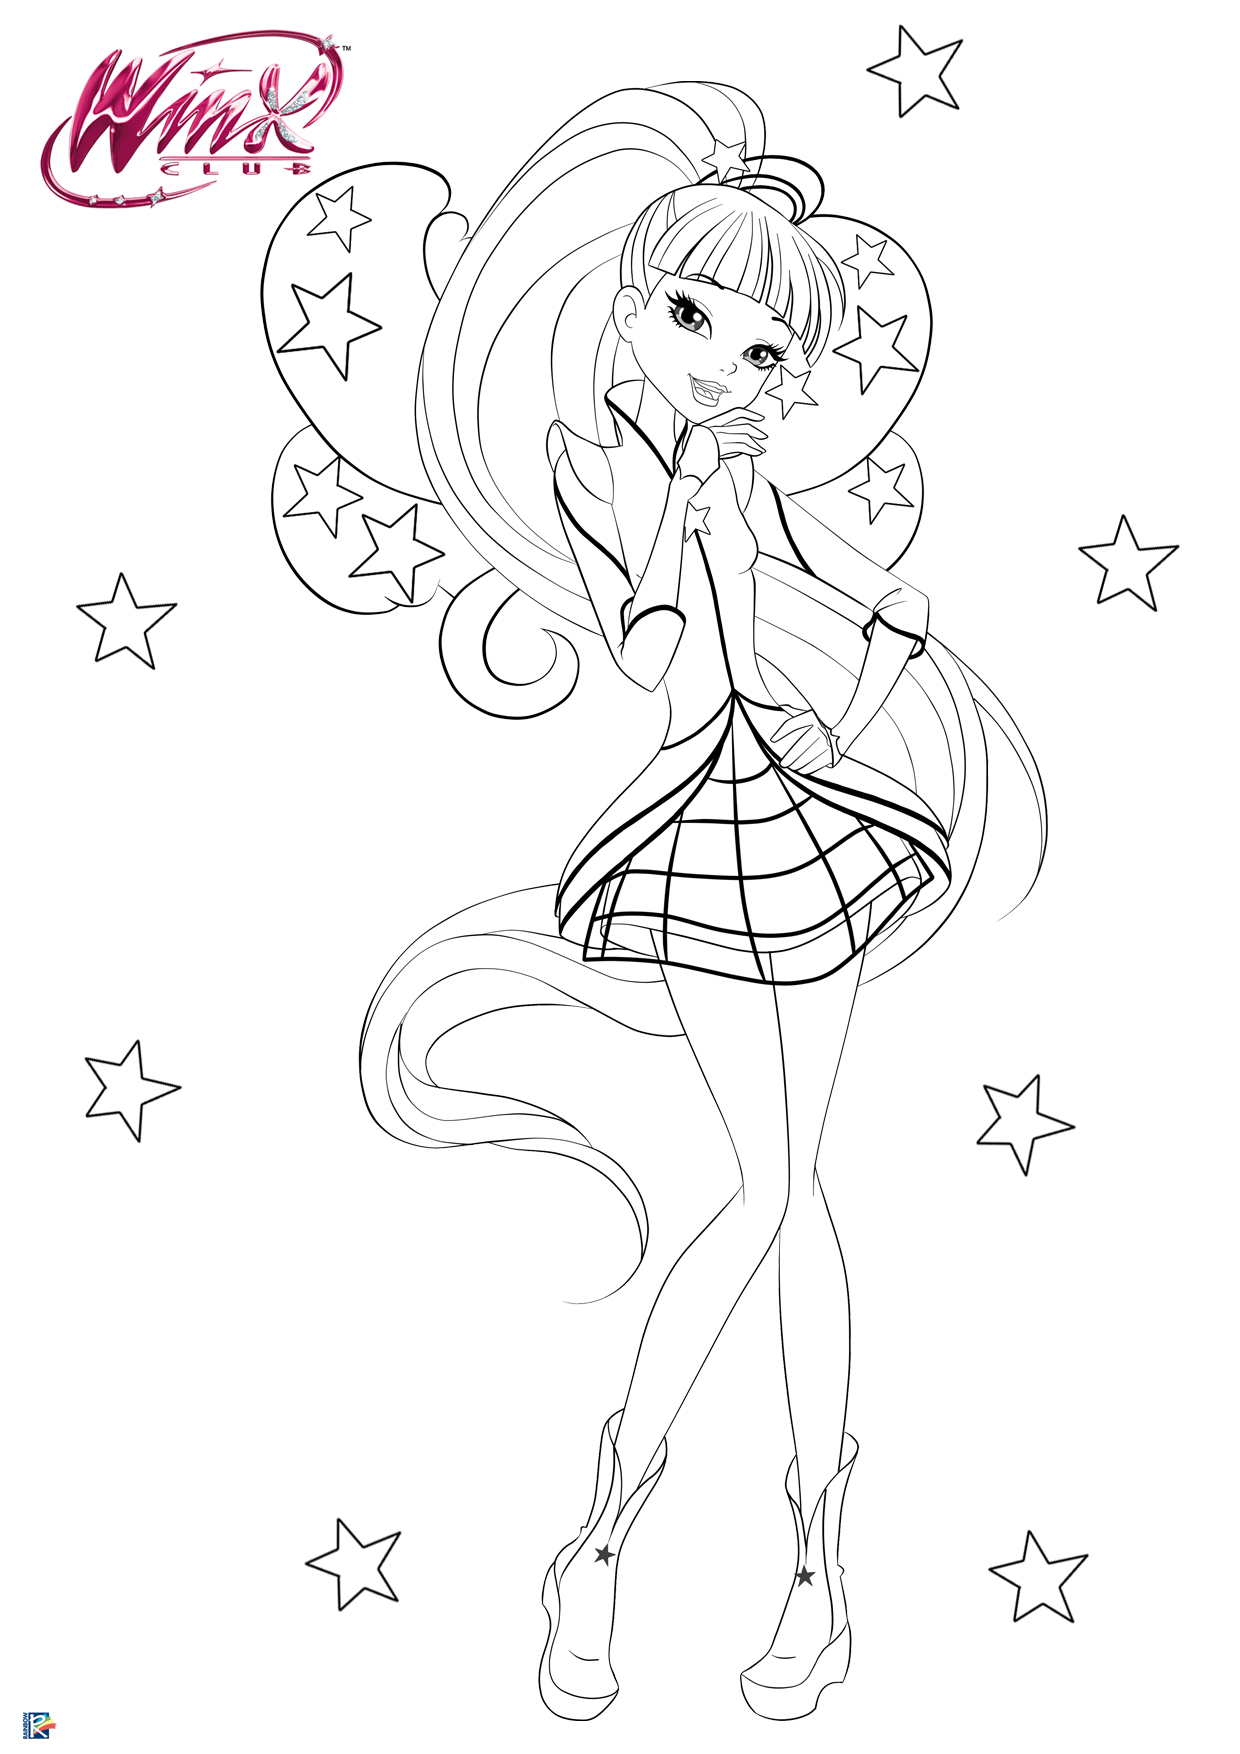 Winx Club season 8 coloring pages with Cosmix